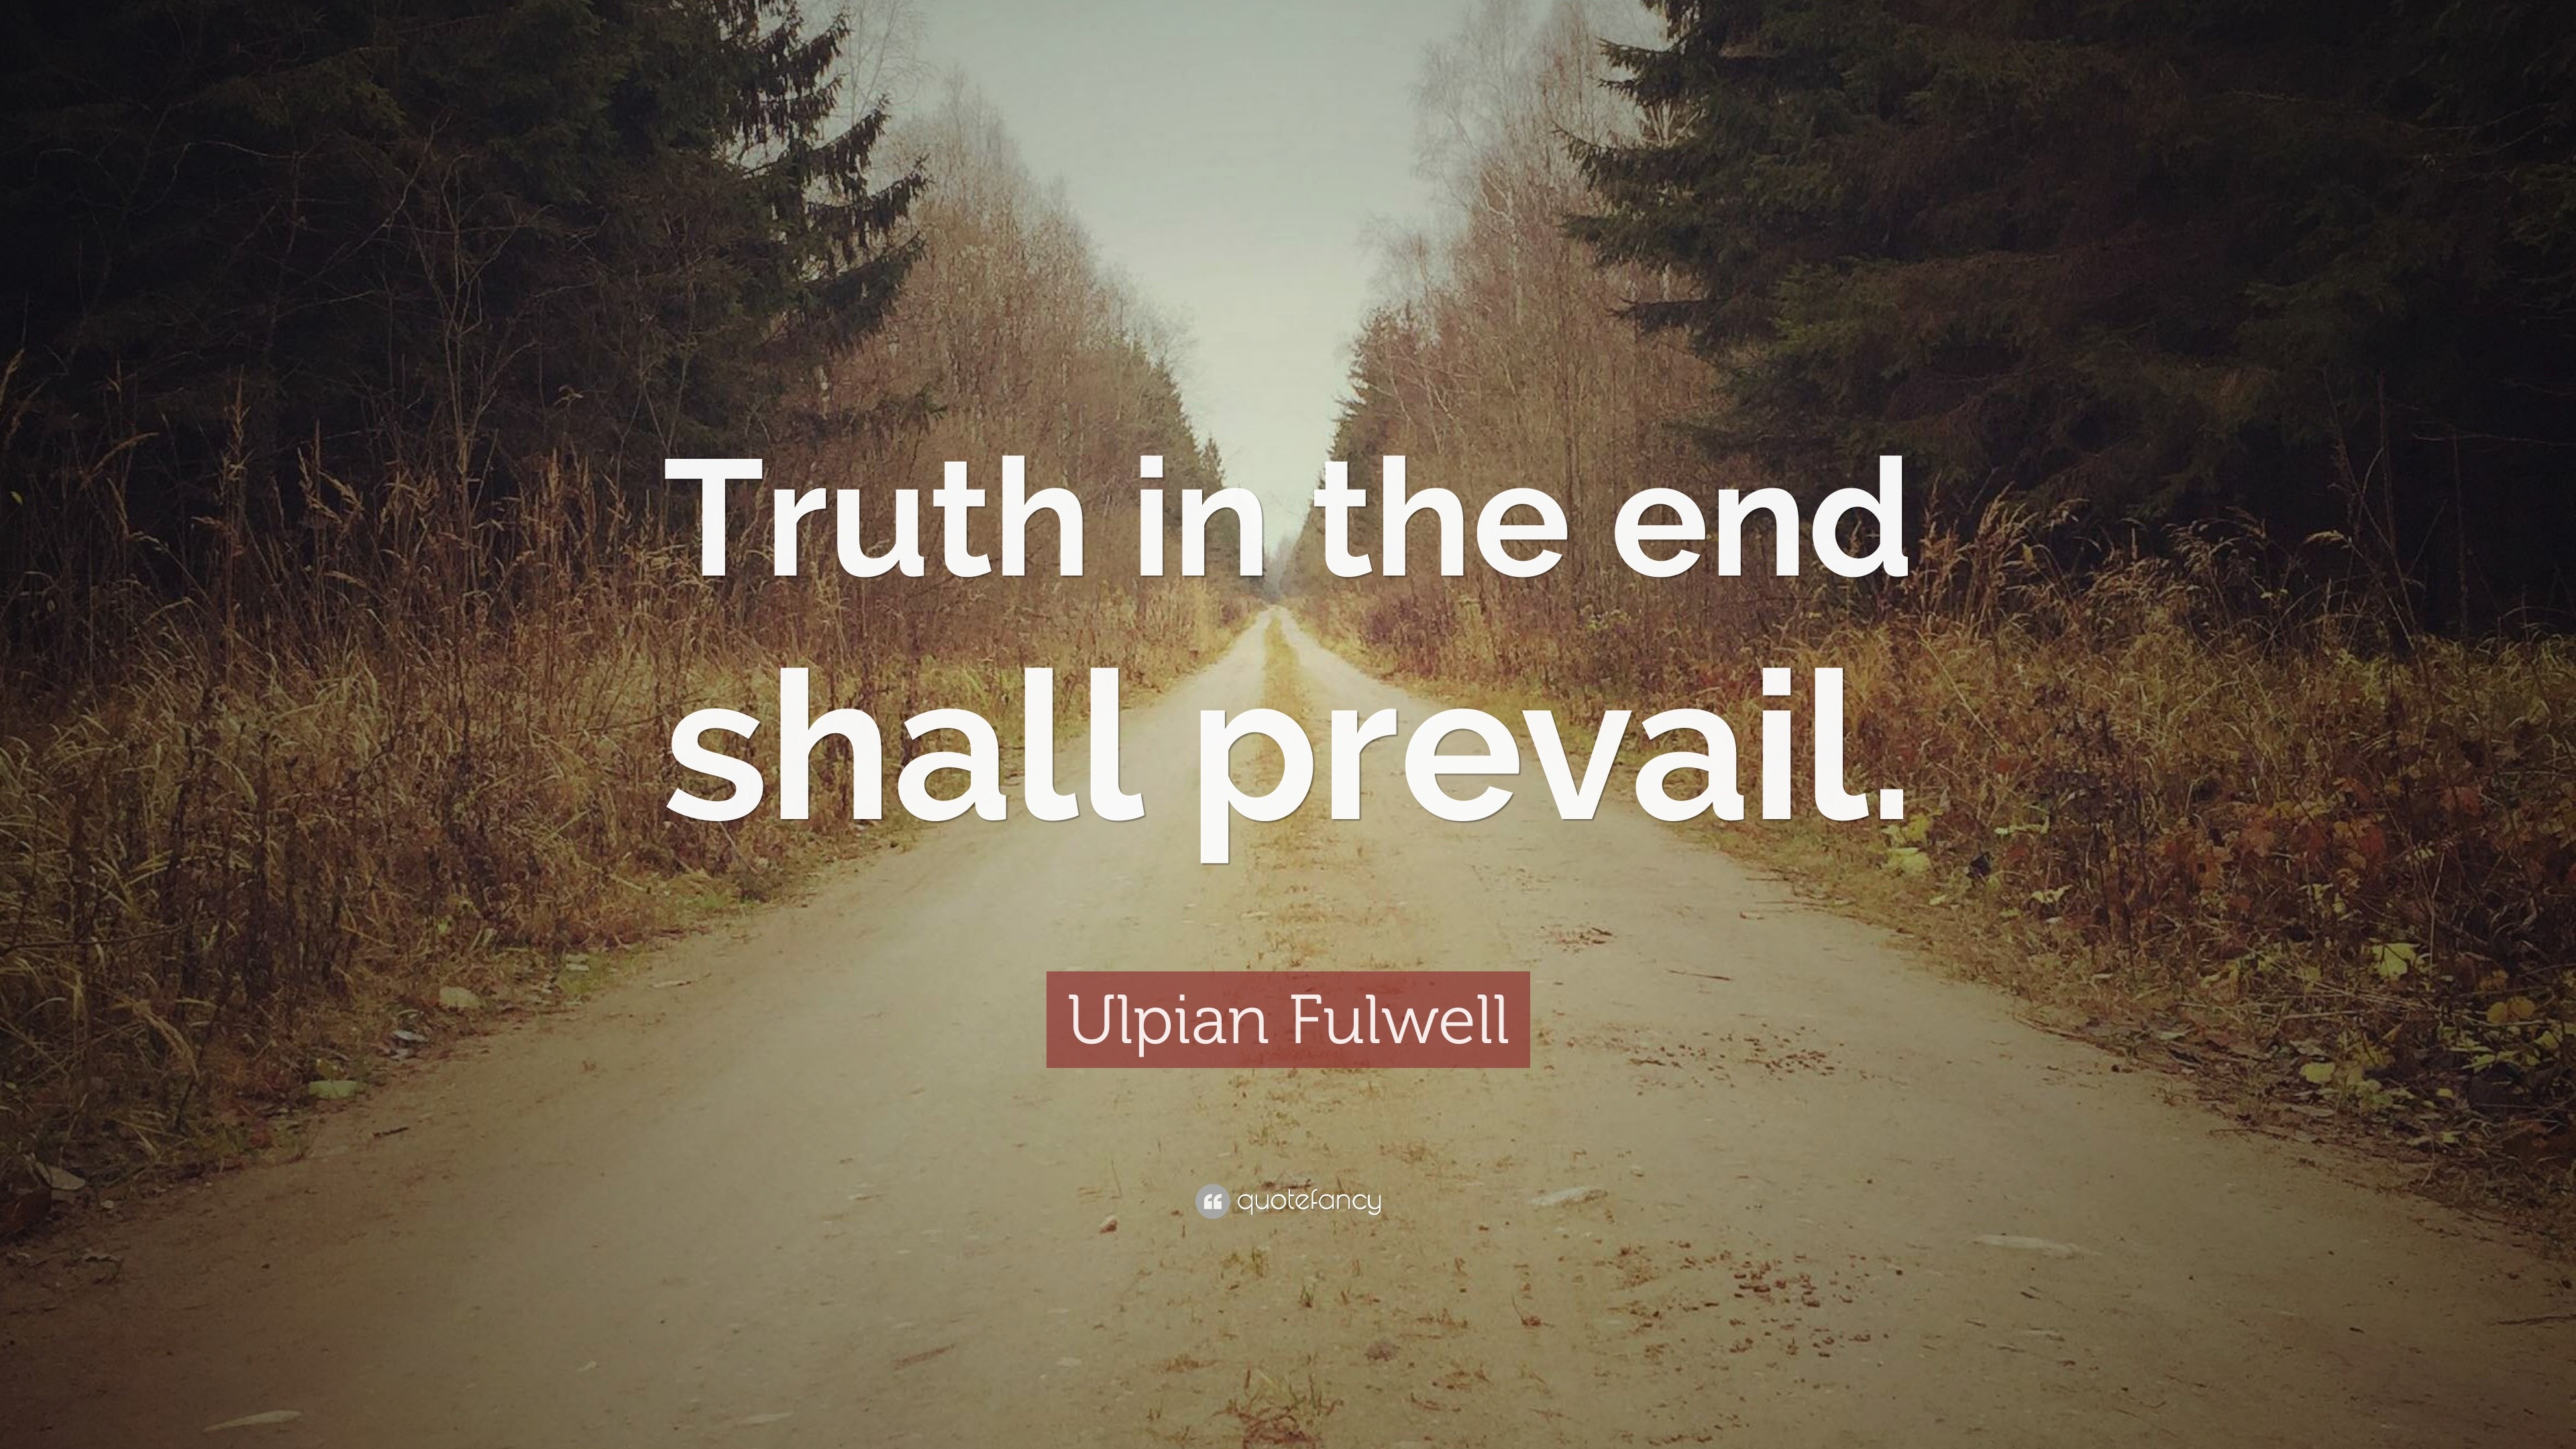 Ulpian Fulwell Quote: "Truth in the end shall prevail." (7 ...